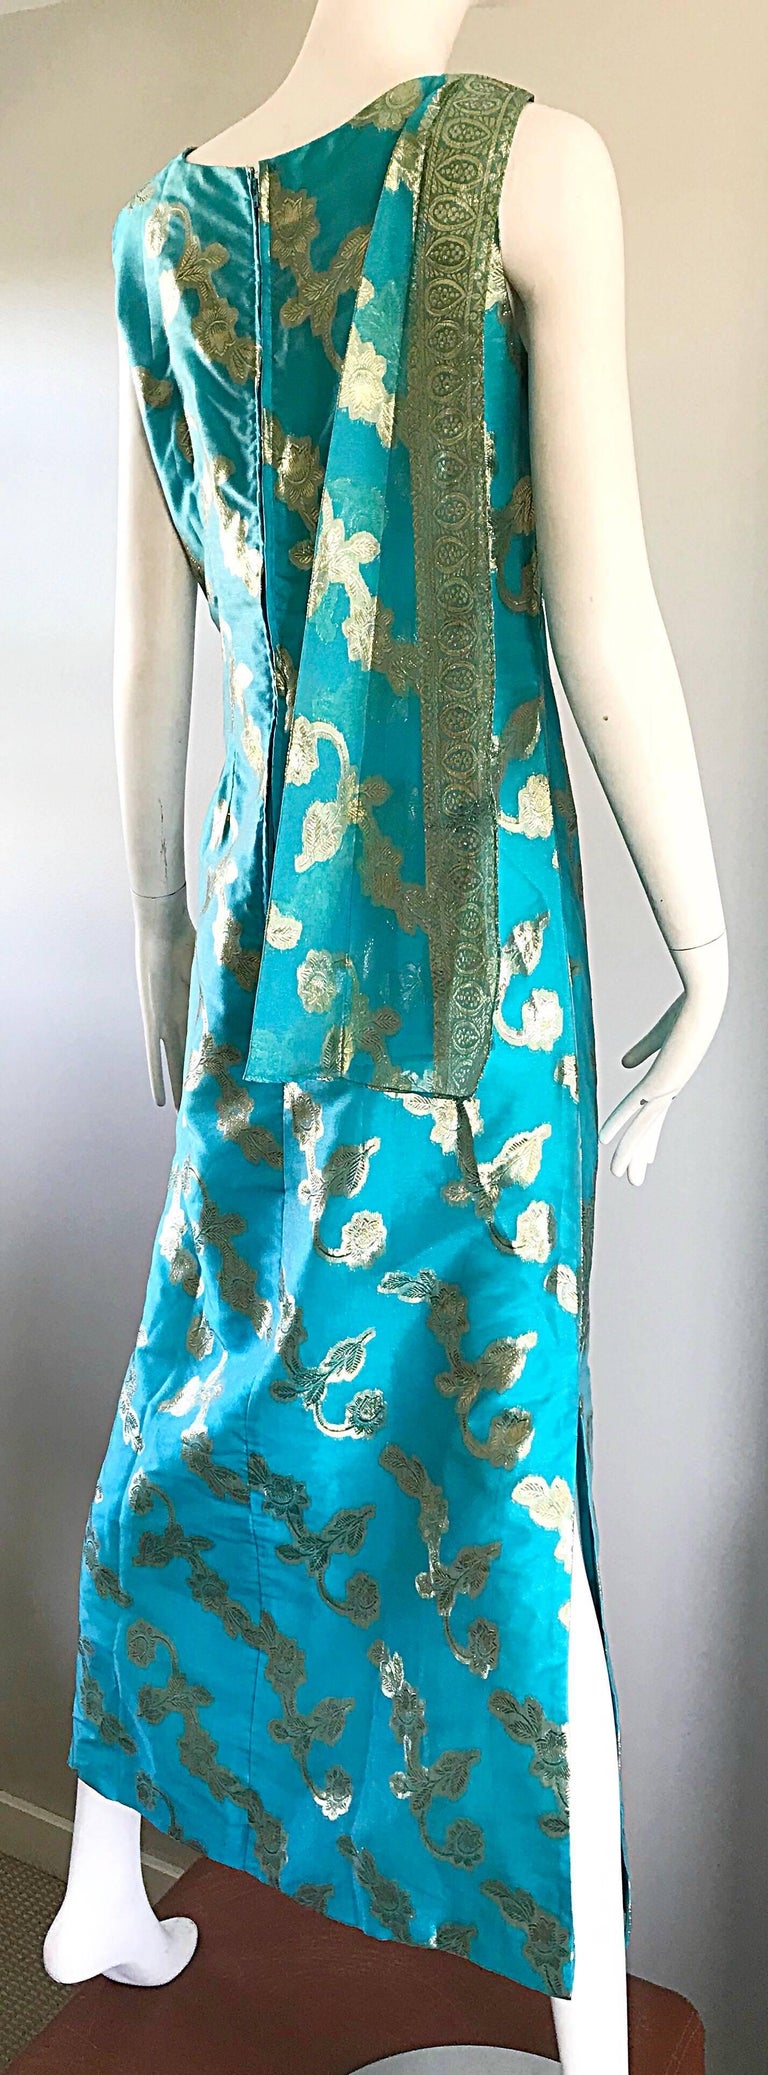 1960s Waltah Clarke's Turquoise Blue and Gold Vintage 60s Silk Maxi ...